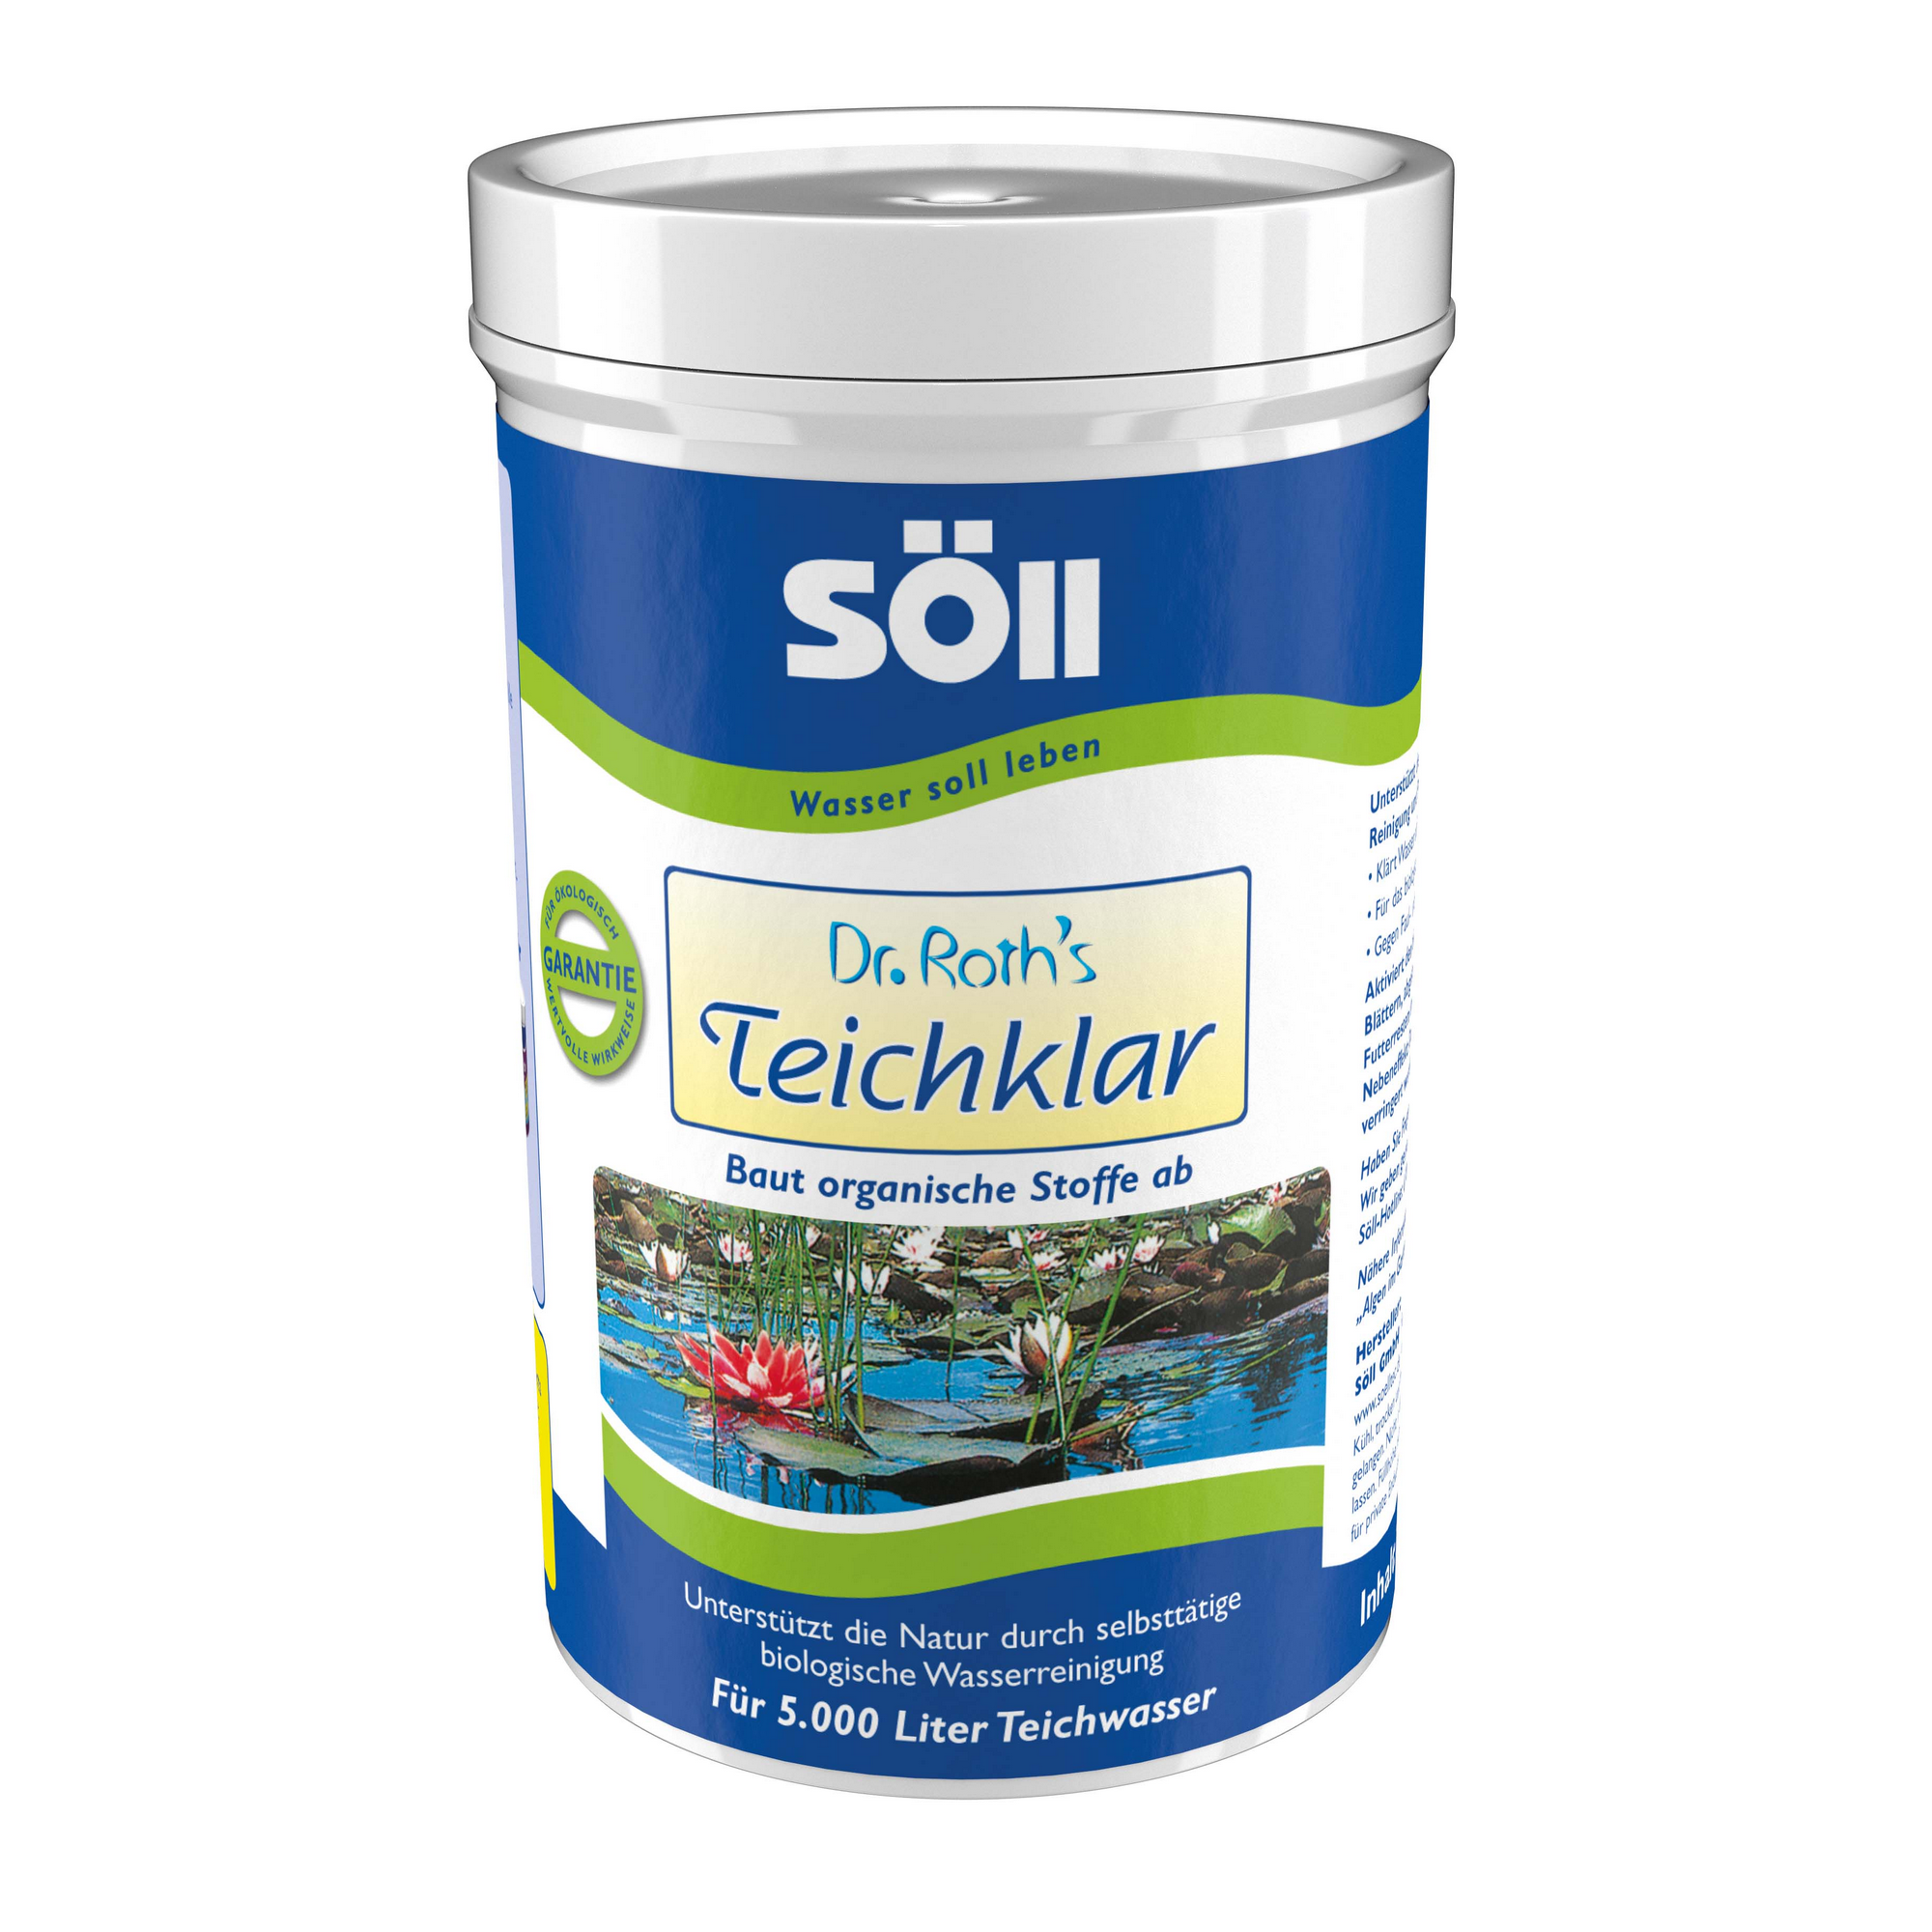 Teichpflege 'Dr. Roth's TeichKlar' 250 g + product picture